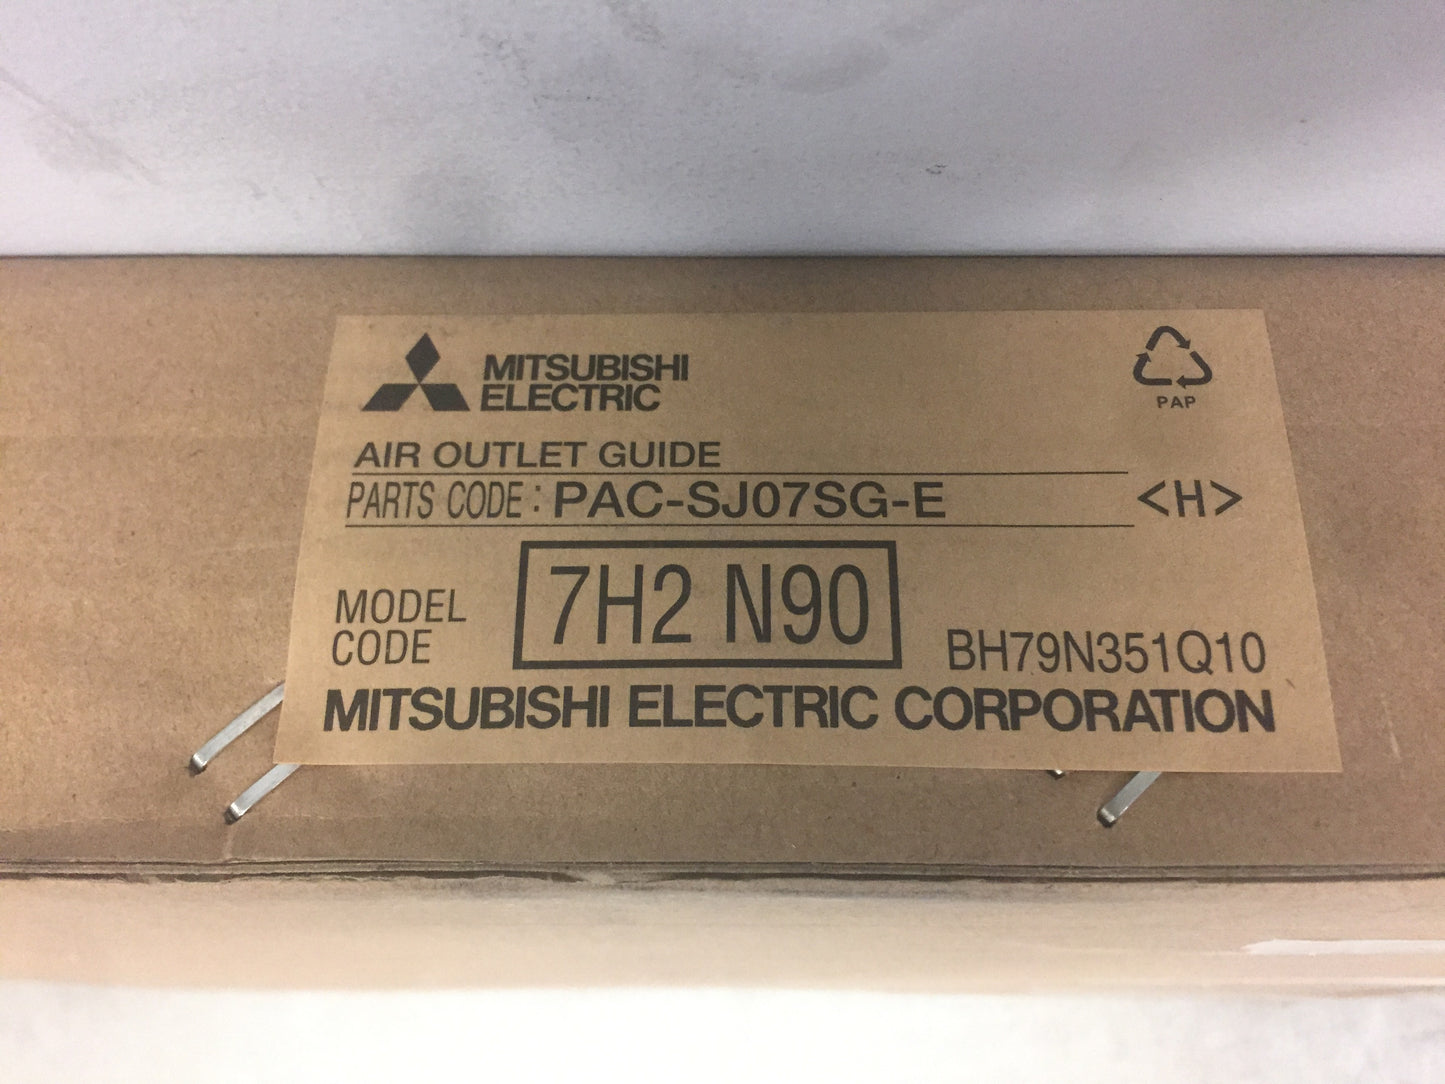 MITSUBISHI AIR OUTLET GUIDE